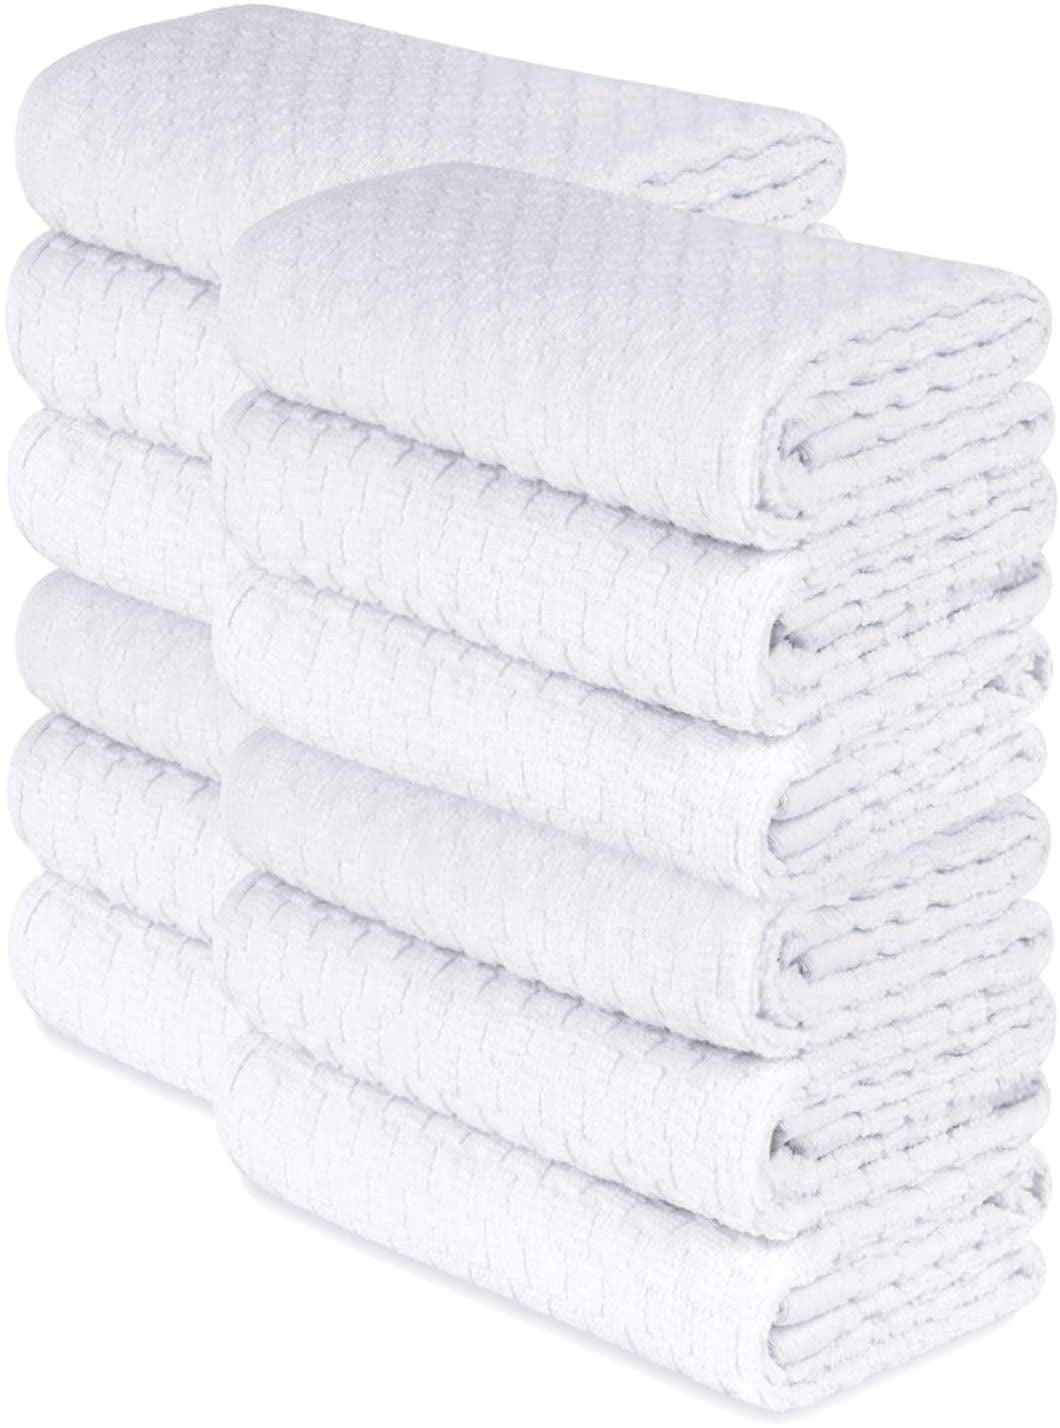 Details about   Family Chef 5  Microfiber Hand Towels   Assorted Colors 